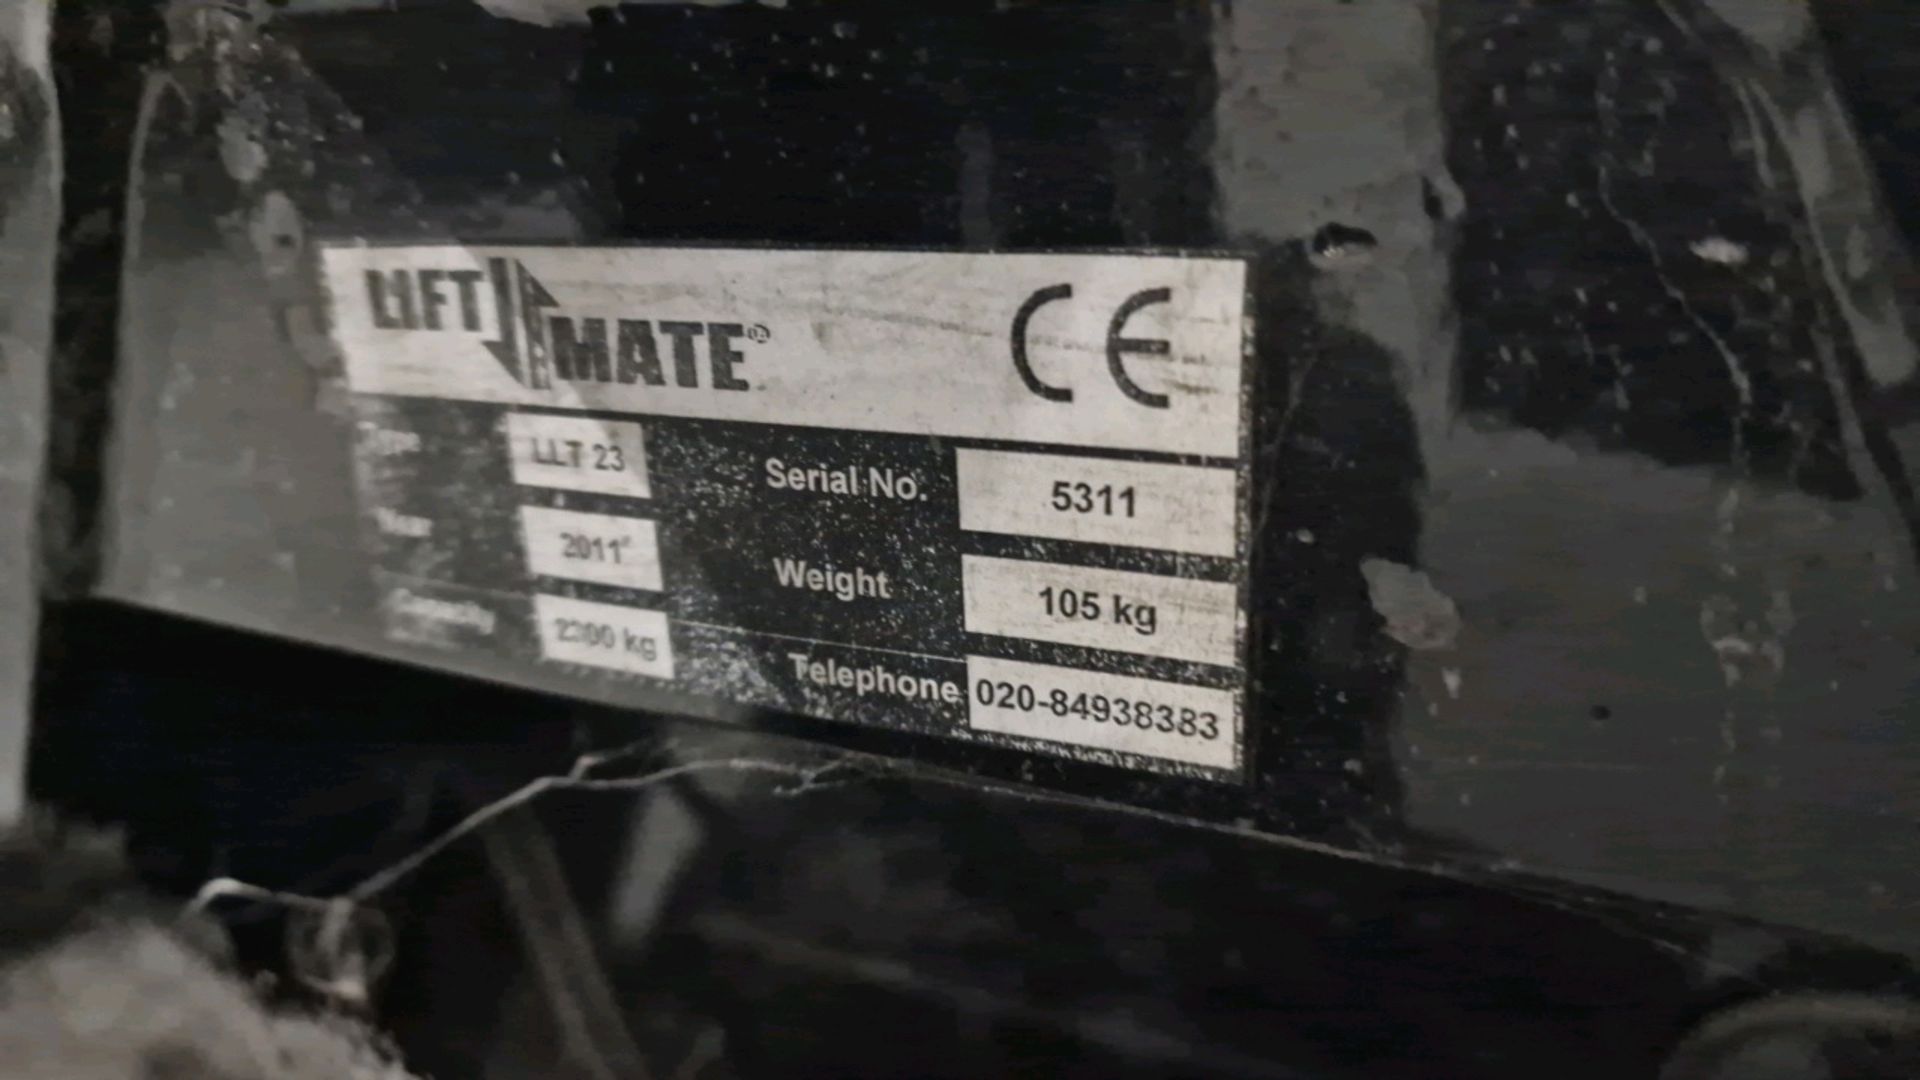 Lift Mate Hand Pallet Truck - Image 4 of 5